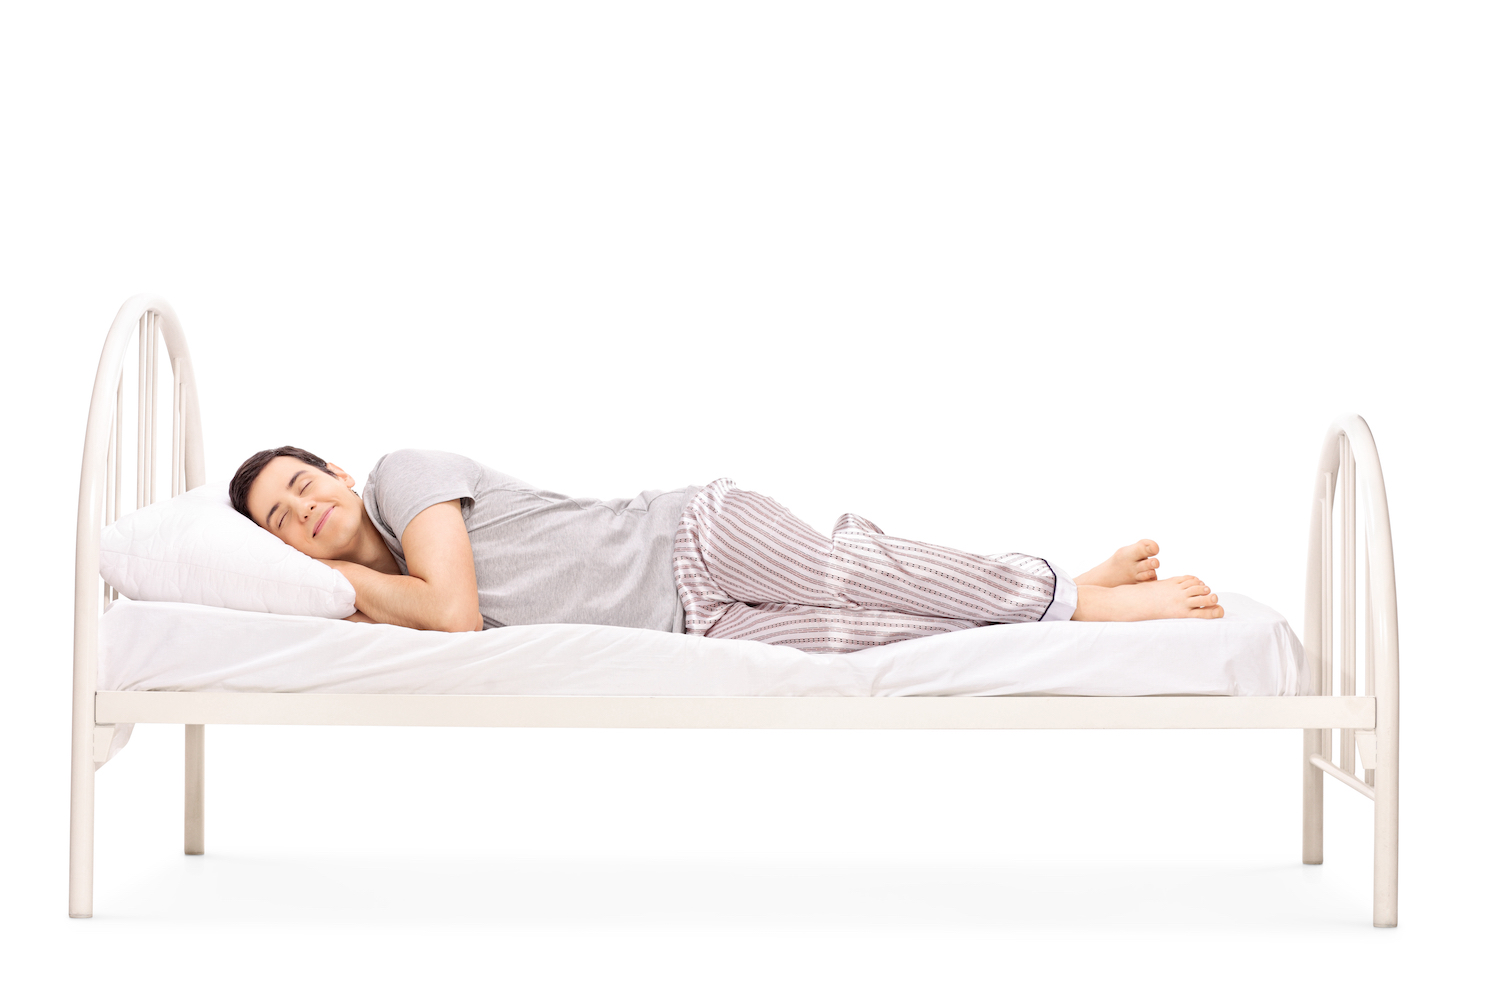 Man Sleeping on a Twin size bed